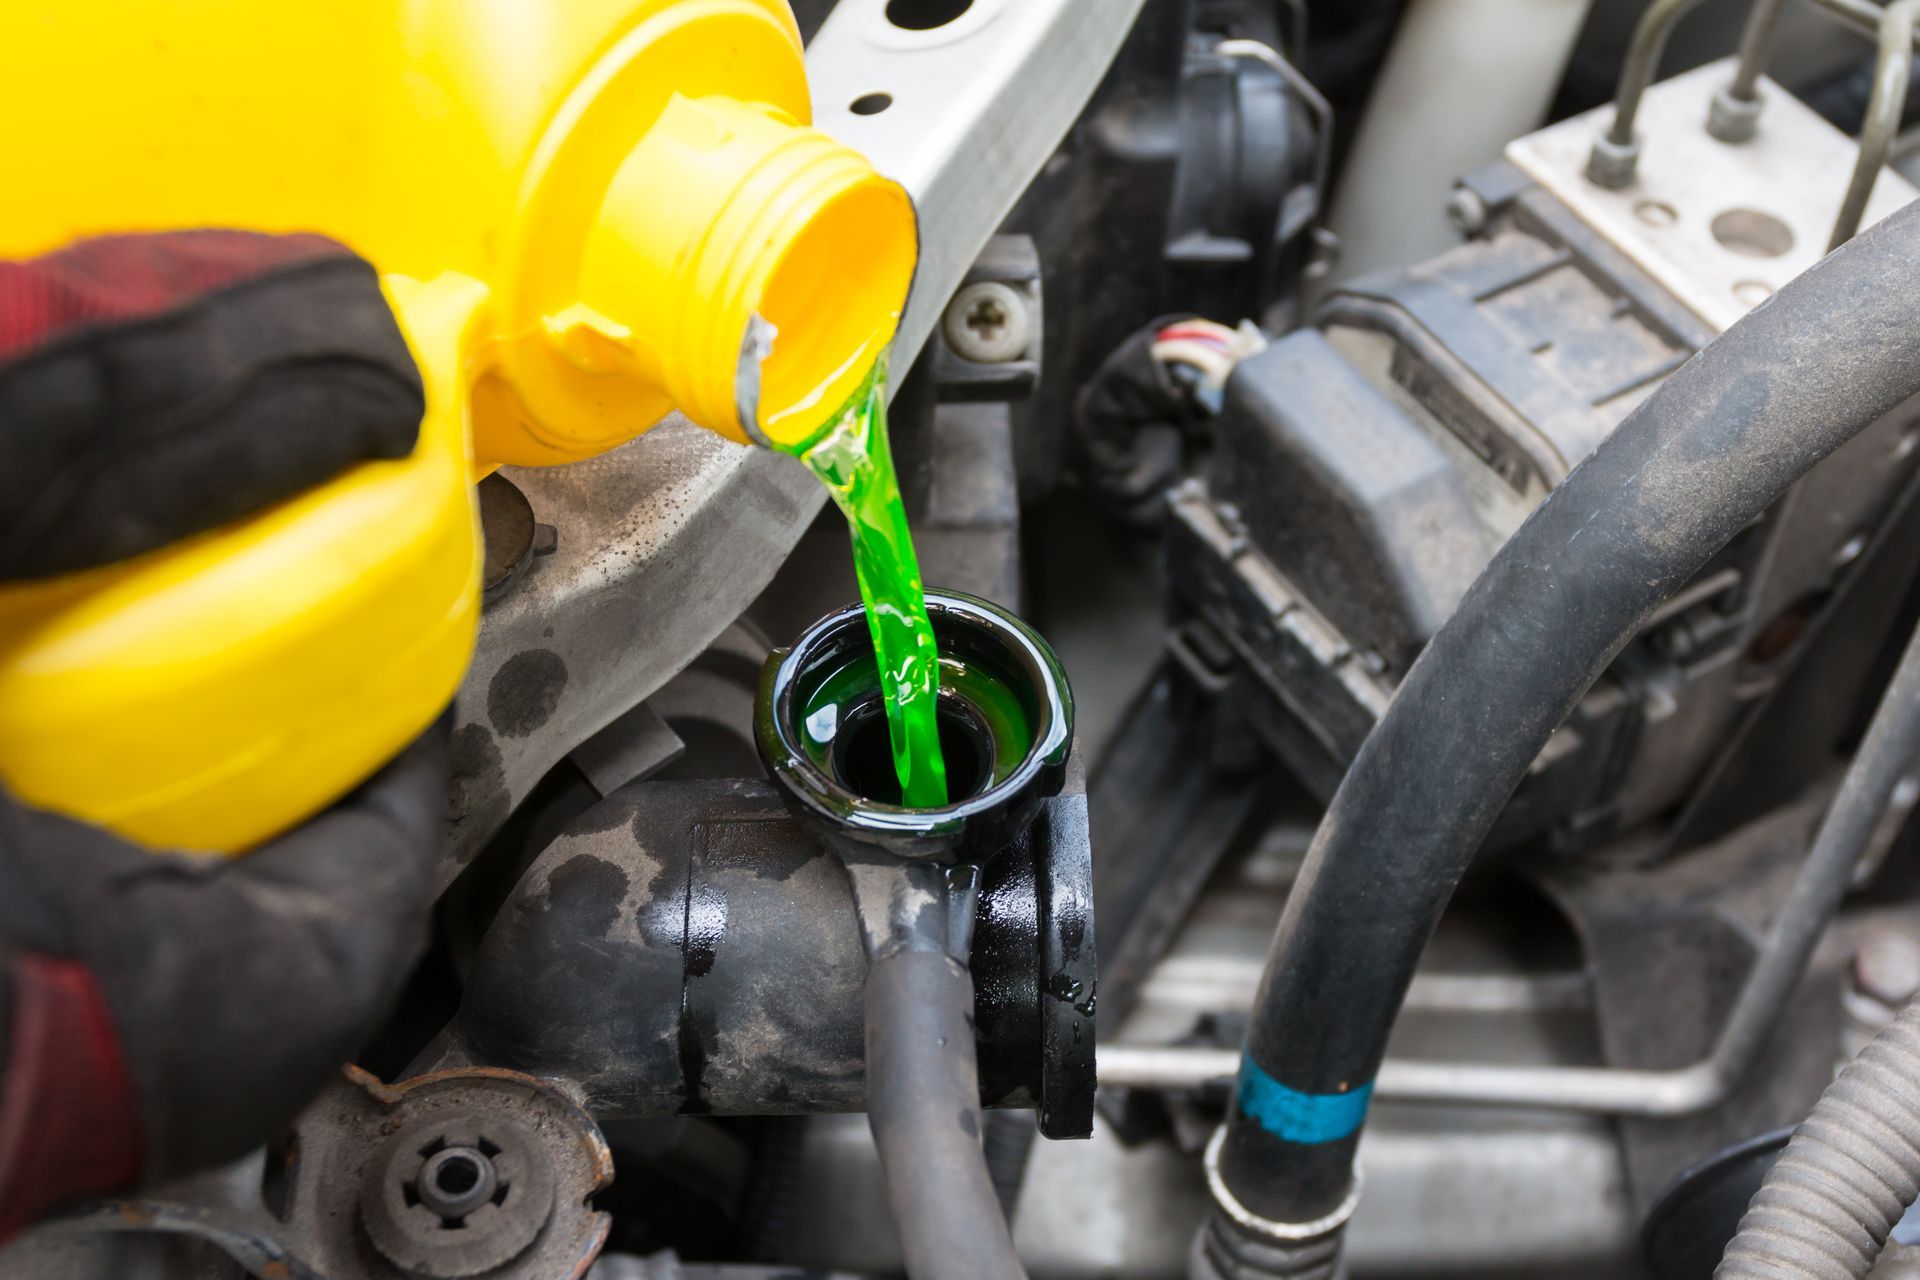 Coolant & Antifreeze at ﻿Terry's Automotive Group﻿ in ﻿Olympia, WA﻿